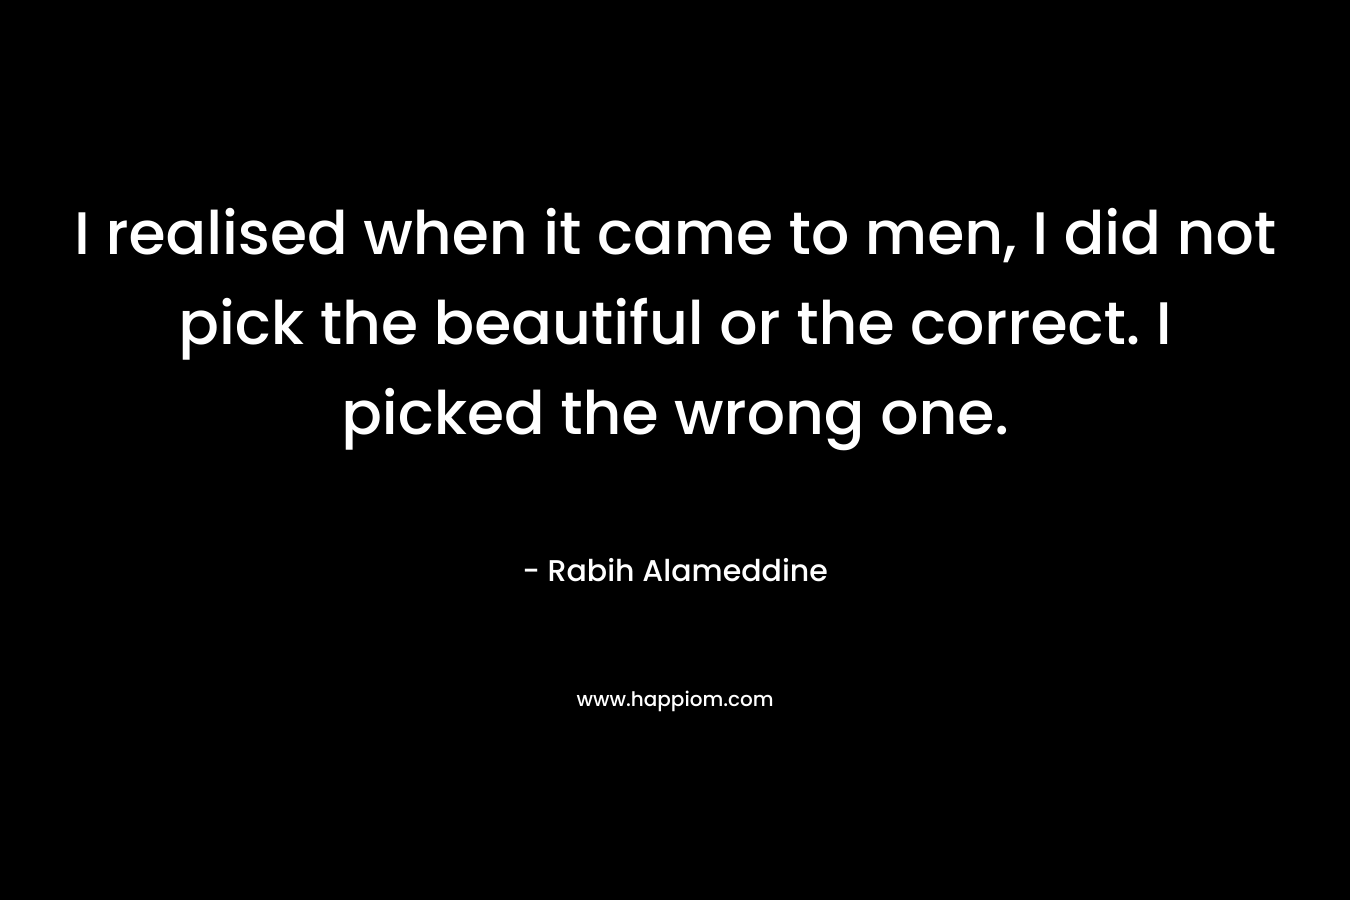 I realised when it came to men, I did not pick the beautiful or the correct. I picked the wrong one. – Rabih Alameddine